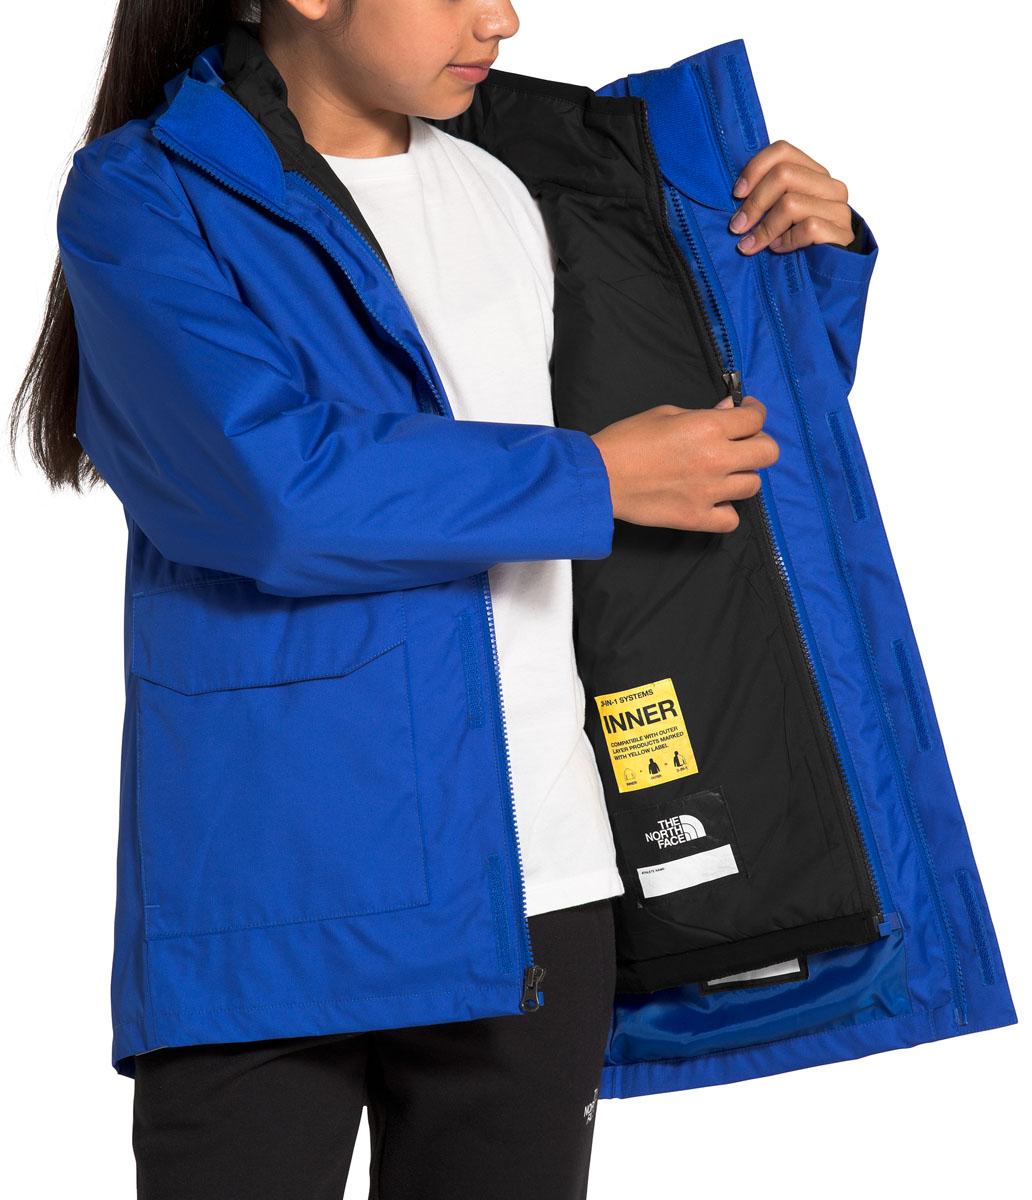 NORTH FACE MIX AND MATCH TRI JACKET YOUT